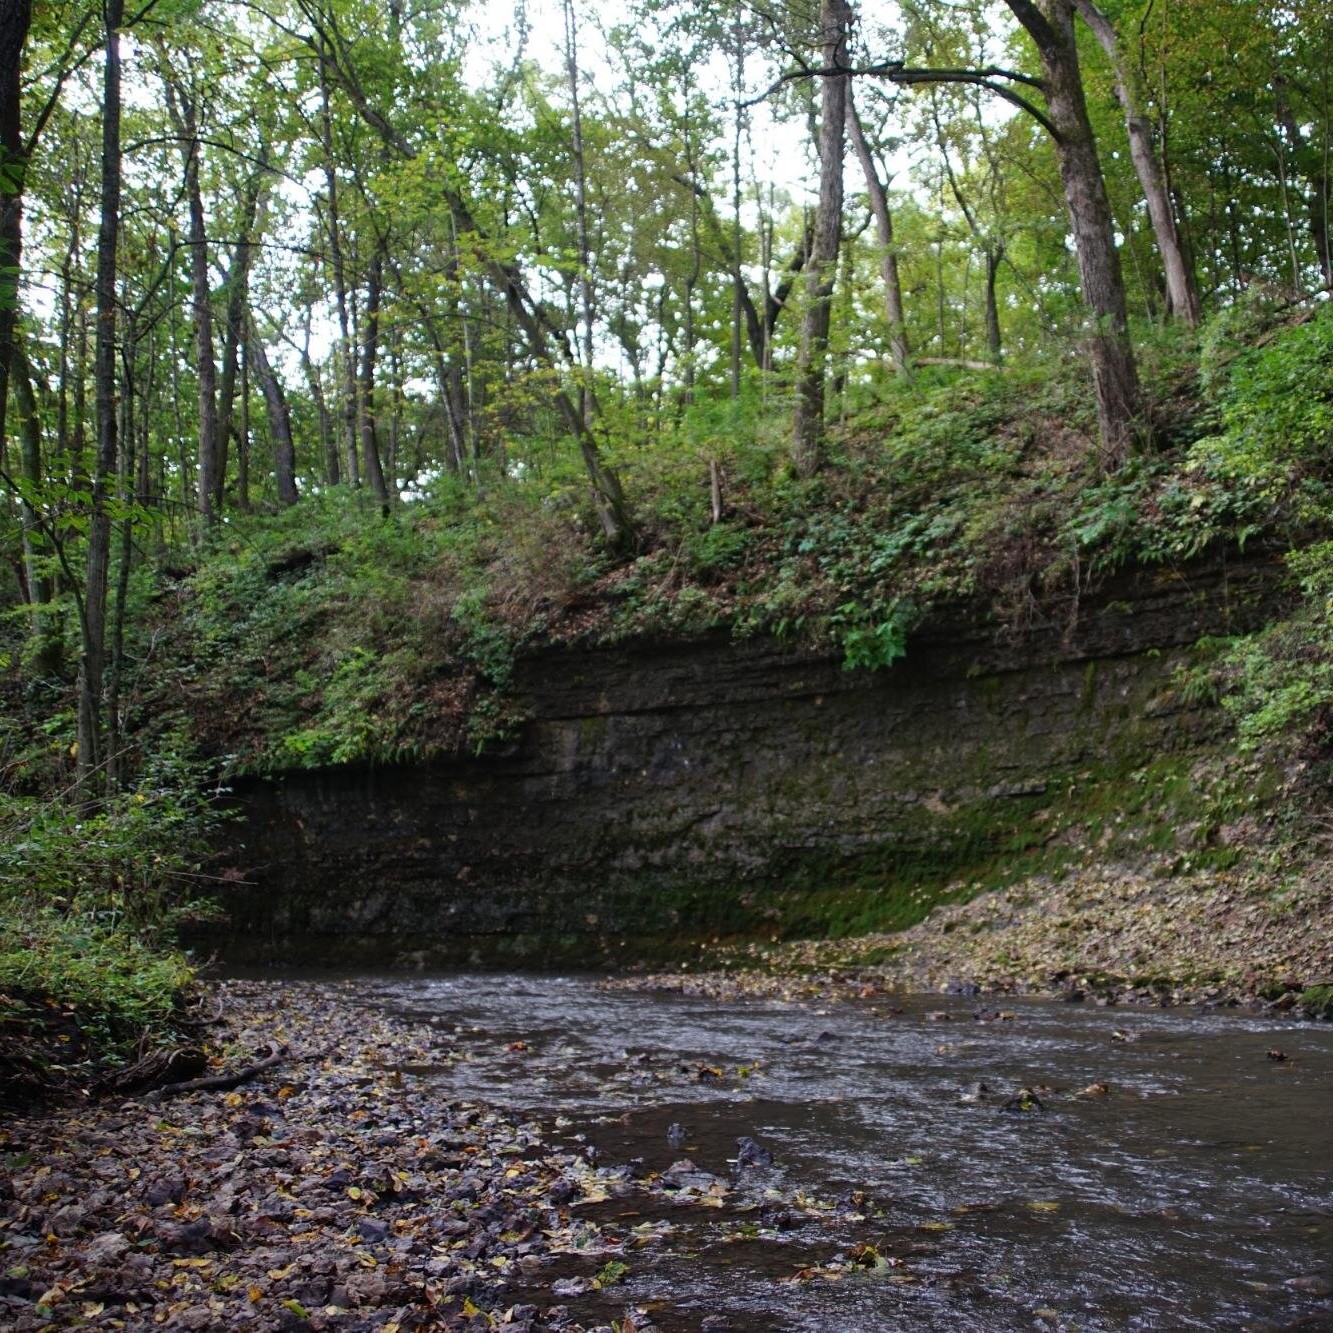 A small stream flowing through a wooded area, with a small limestone bluff along the water.